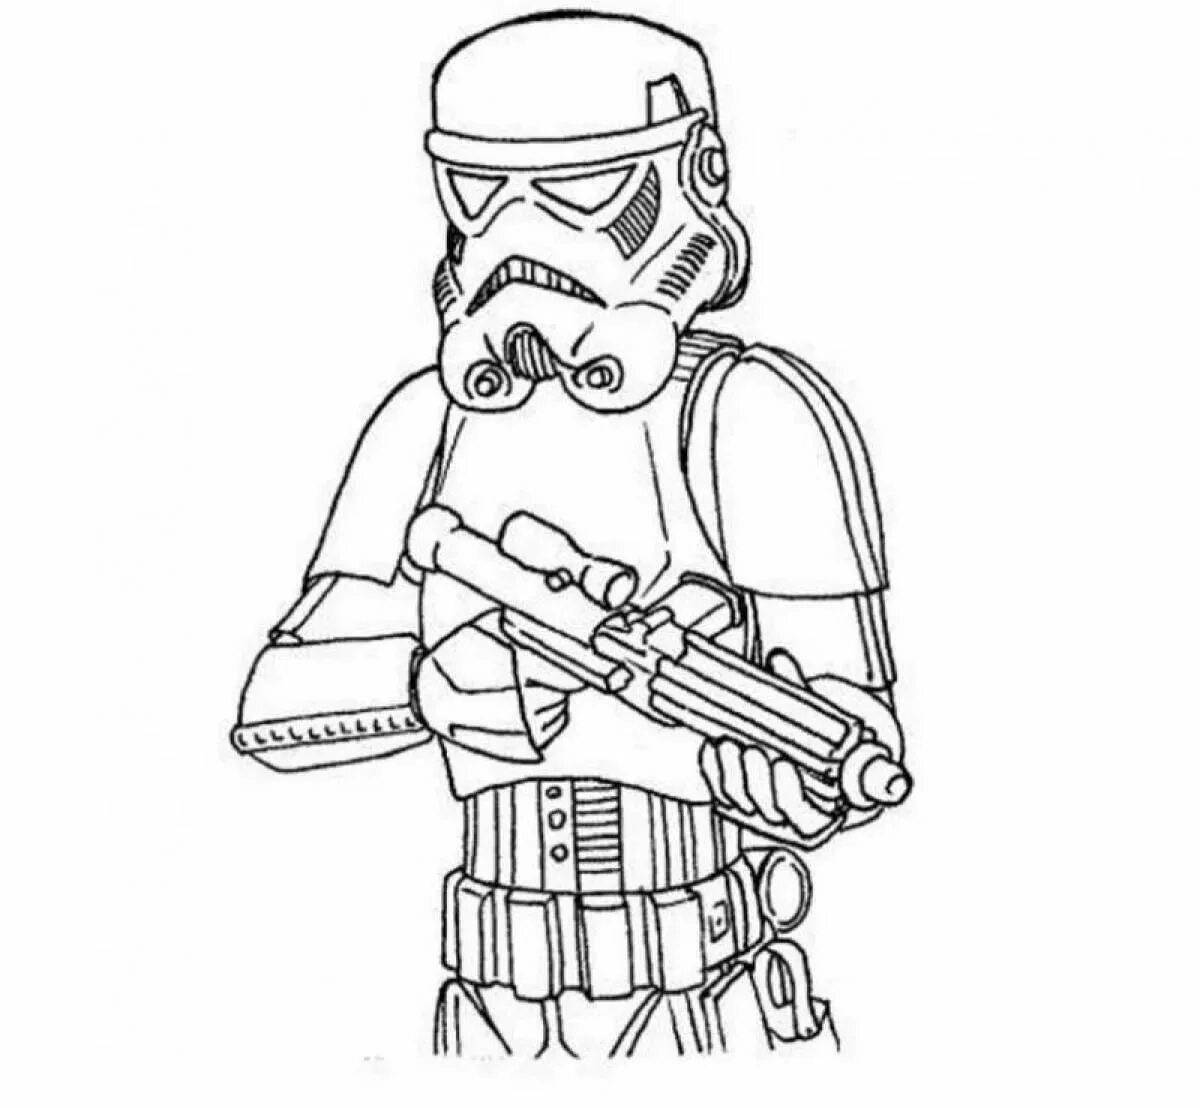 Star Wars coloring book for boys